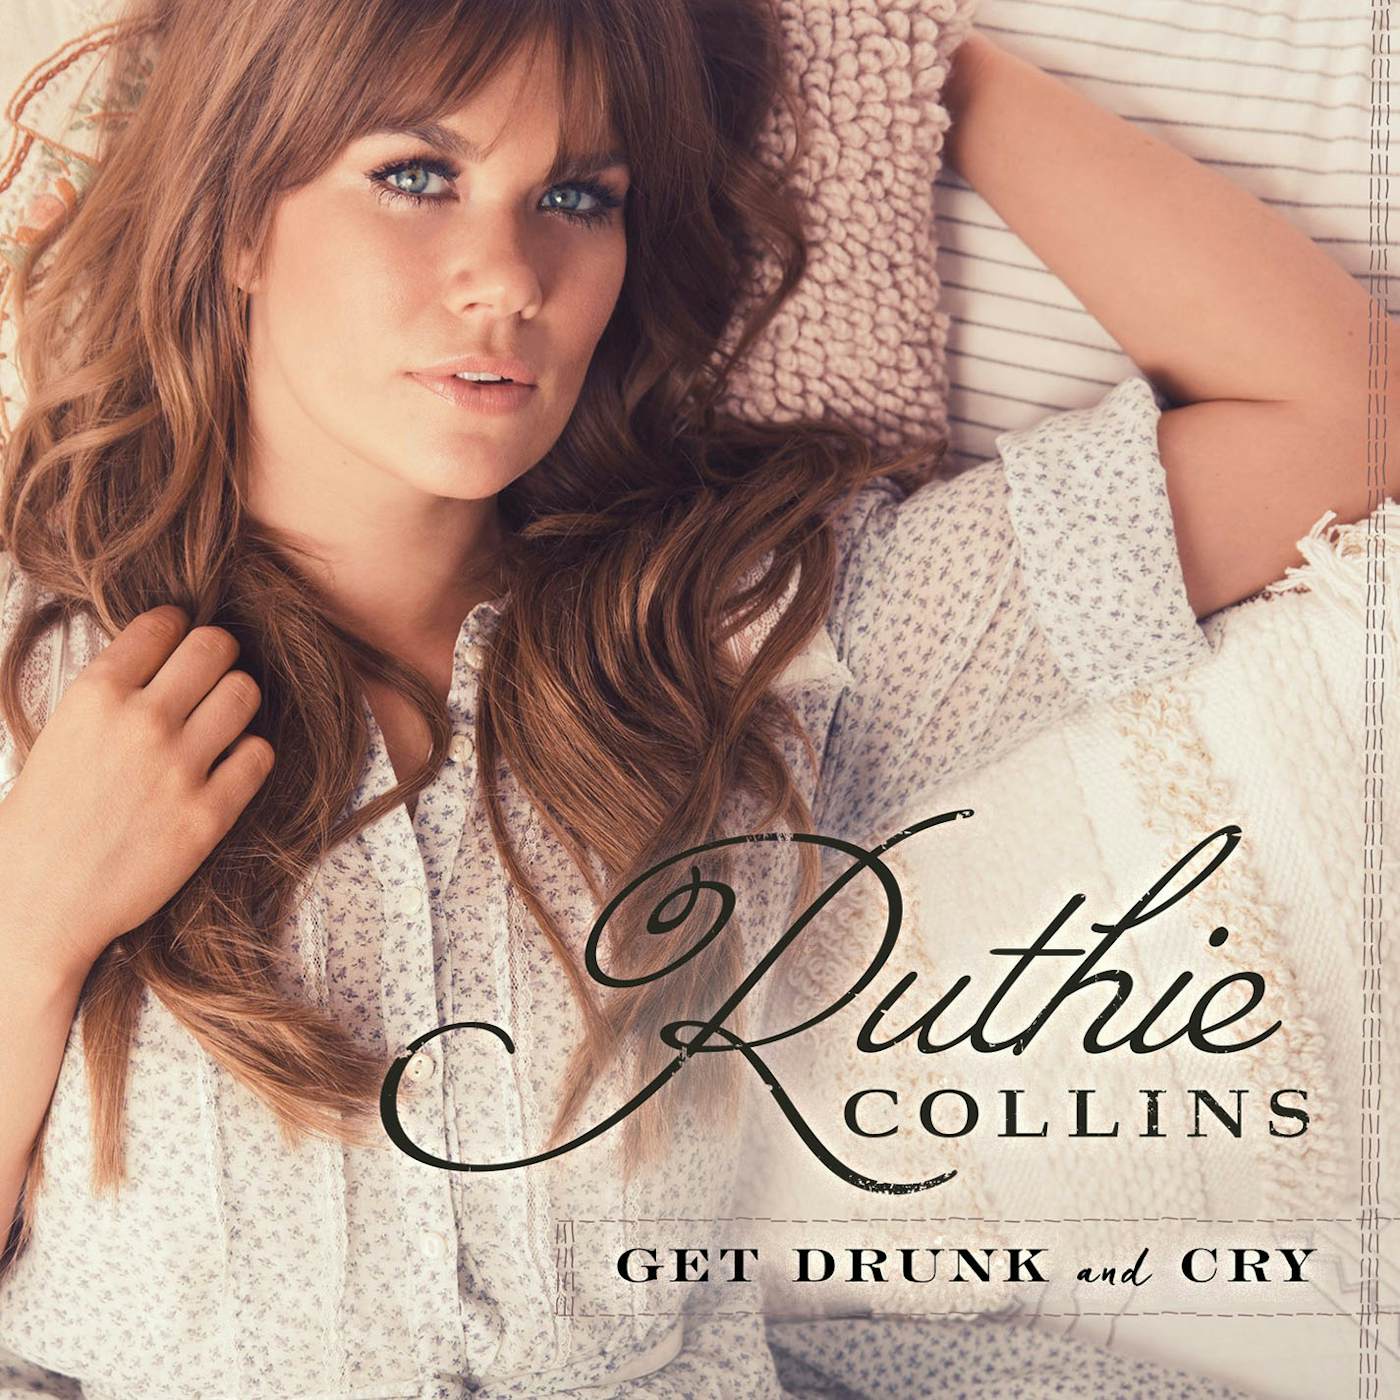 Ruthie Collins GET DRUNK & CRY CD